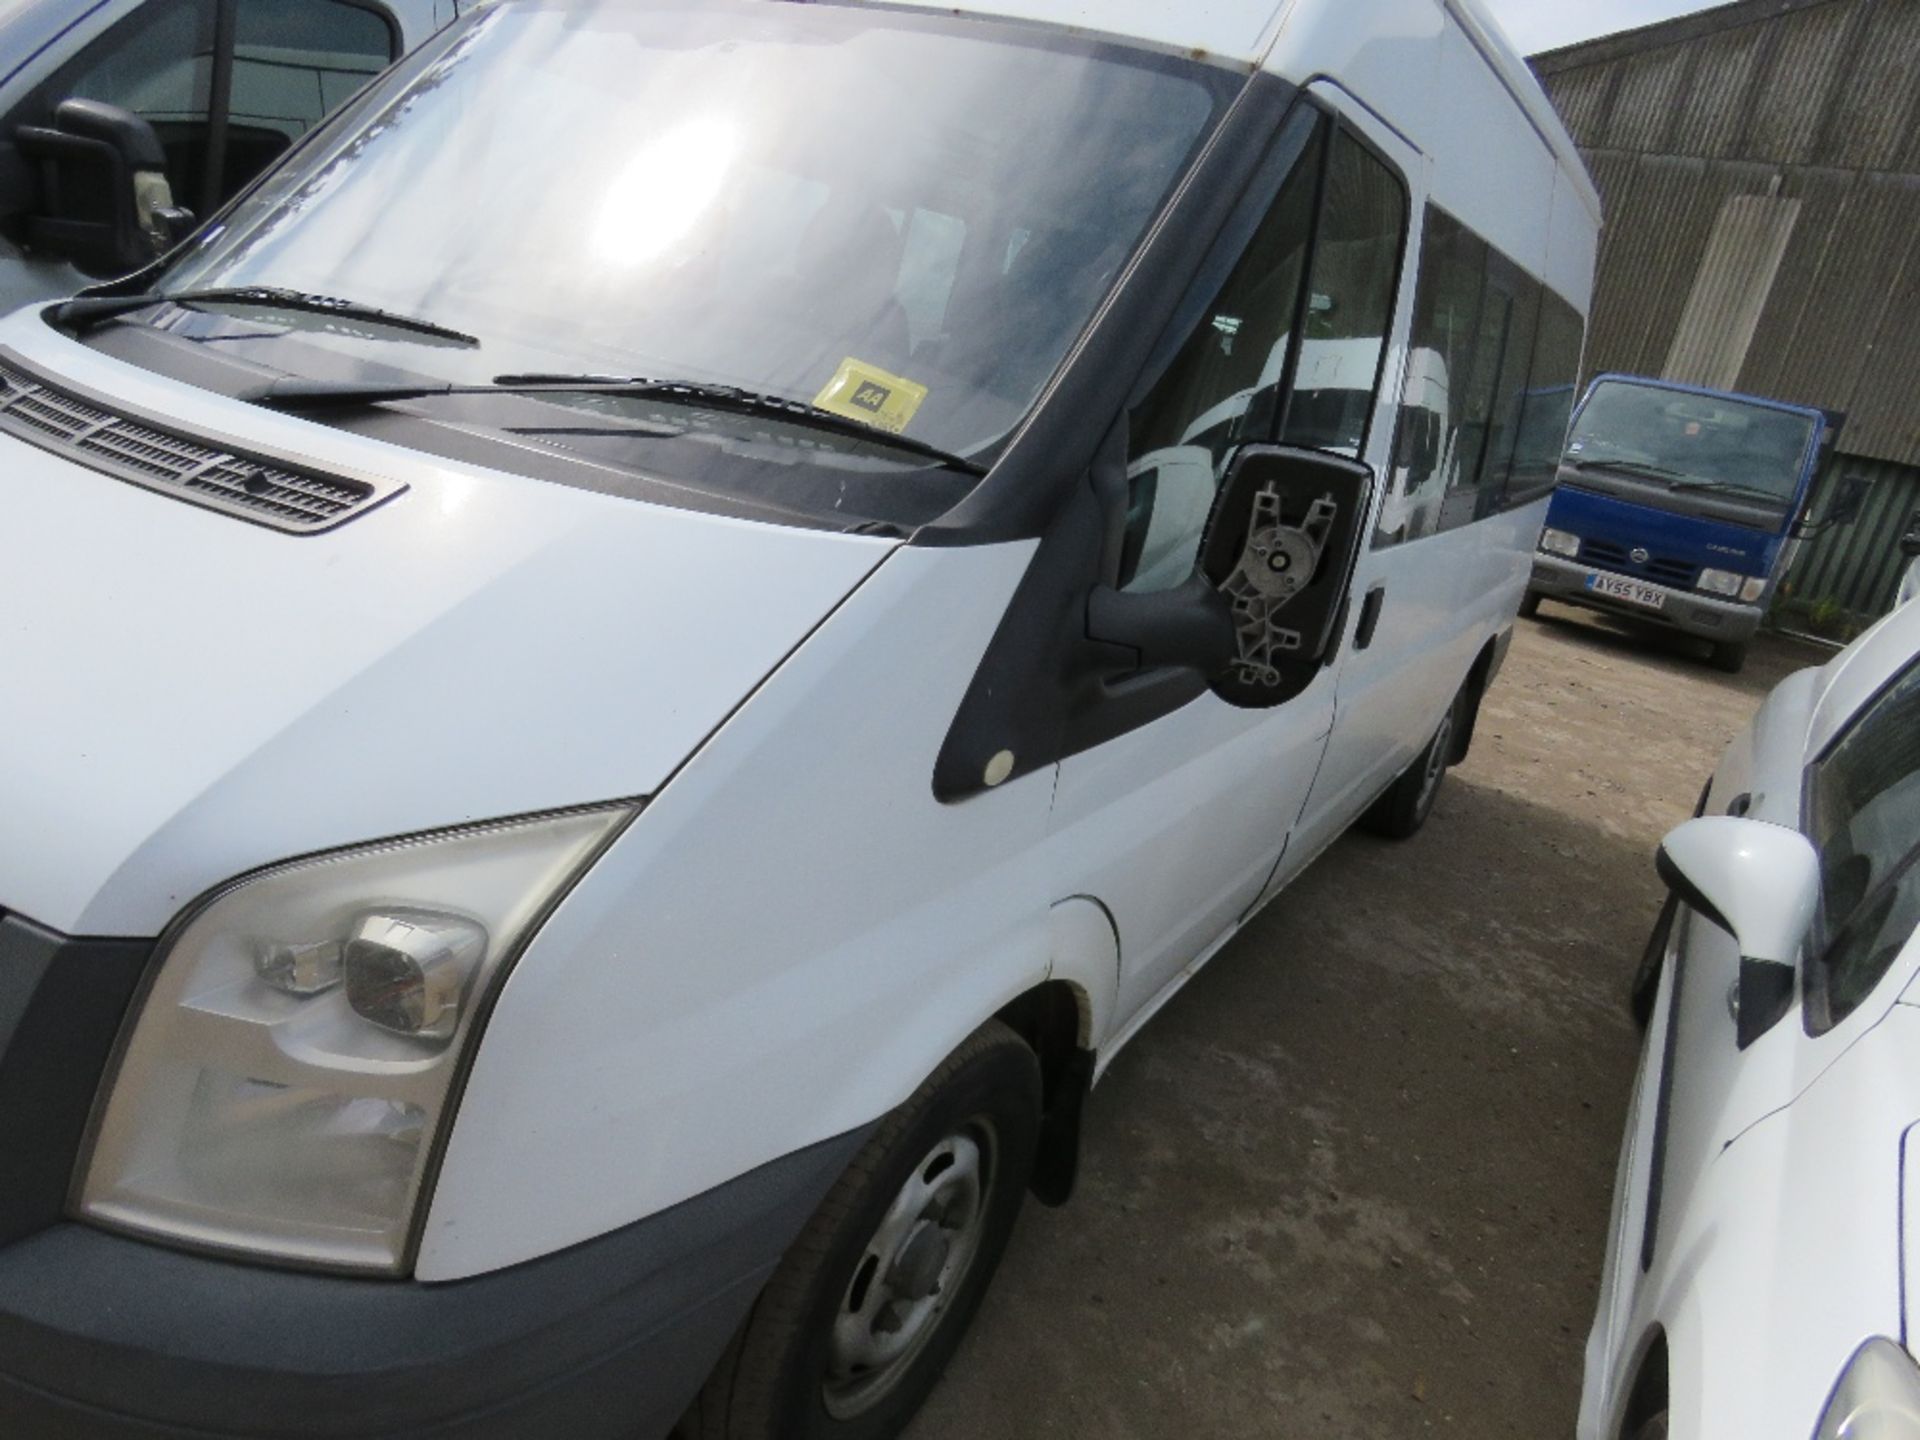 9 SEATER FORD TRANSIT MINI BUS WITH STORAGE BOOT REG: CV10 KLK TESTED TILL 22/2/21. DIRECT EX LOCAL - Image 3 of 7